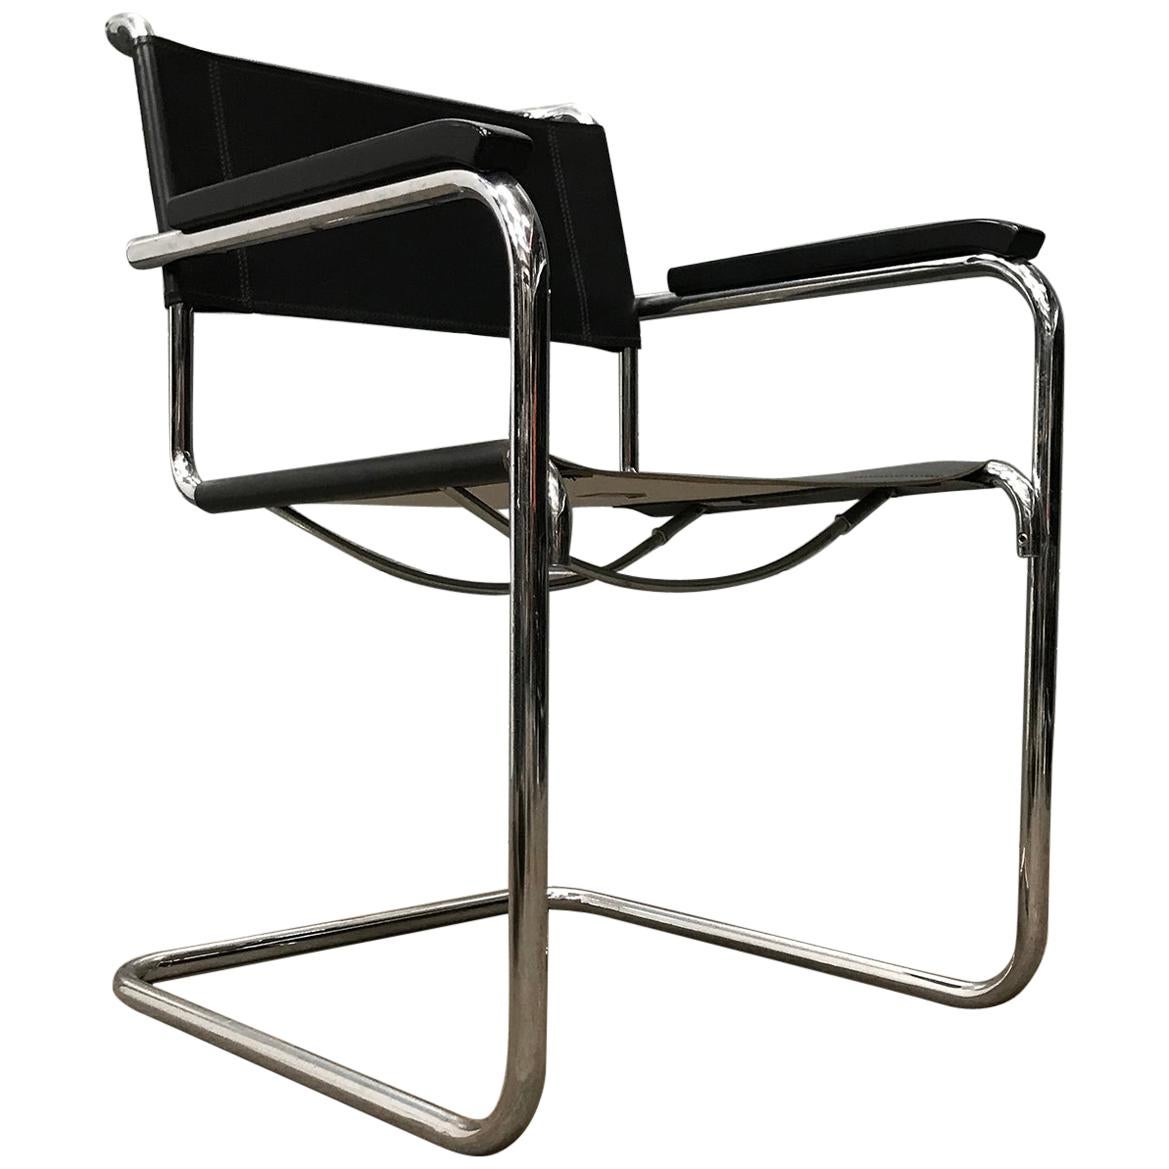 1928, Marcel Breuer for THonet, B34 Side Chair in Black Leather